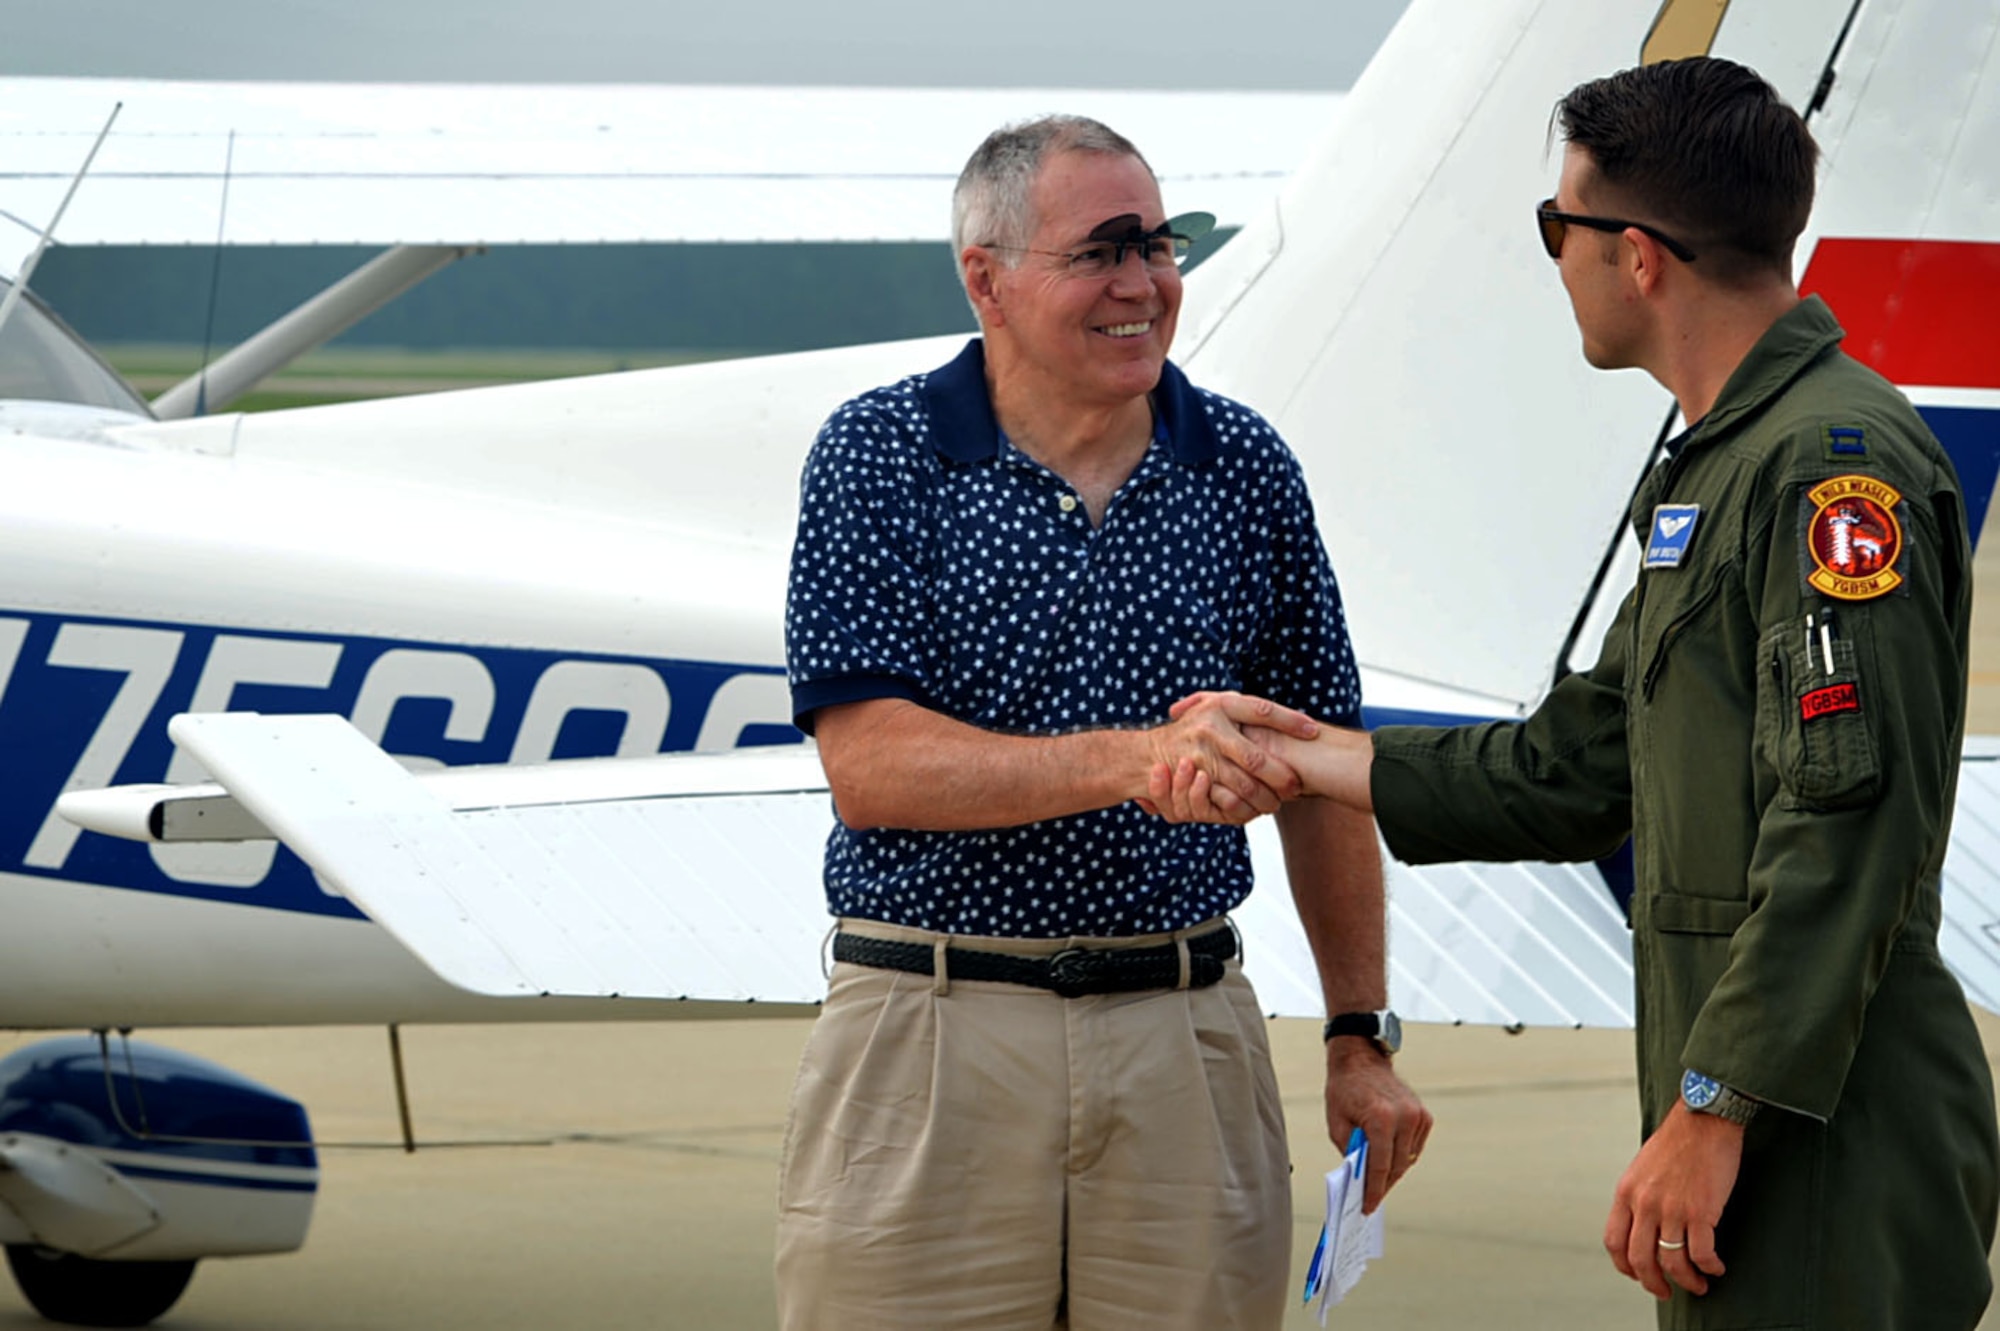 U.S. Air Force Capt. Kyle Bruton, 20th Fighter Wing flight safety chief, greets James Counts, Cessna 172 pilot, during a General Aviation Fly-in event at Shaw Air Force Base, S.C., July 28, 2017. Local aviators received the opportunity to talk to pilots and Airmen about current and future flying conditions. (U.S. Air Force photo by Senior Airman Christopher Maldonado)